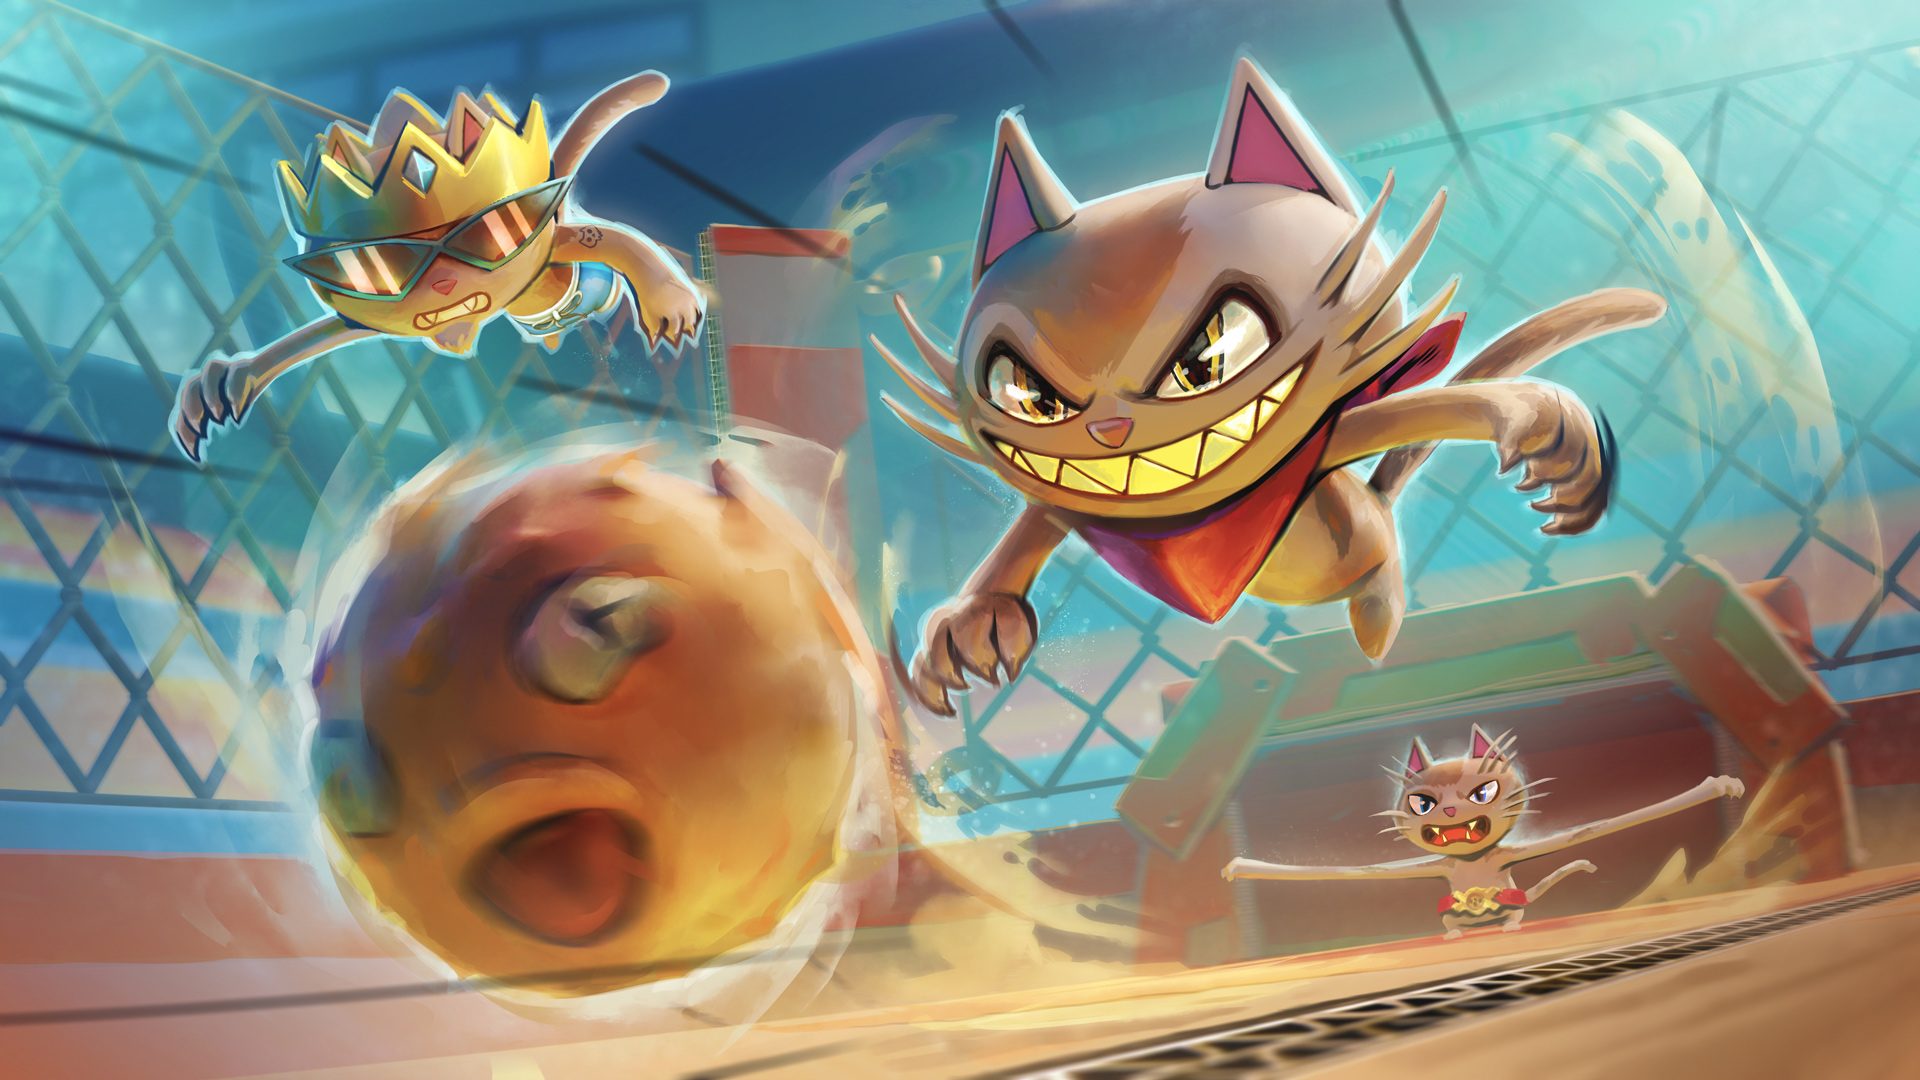 ‘Pixel Ripped’ Studio Announces ‘PAWBALL’, a Free-to-Play VR Soccer Game with Cats